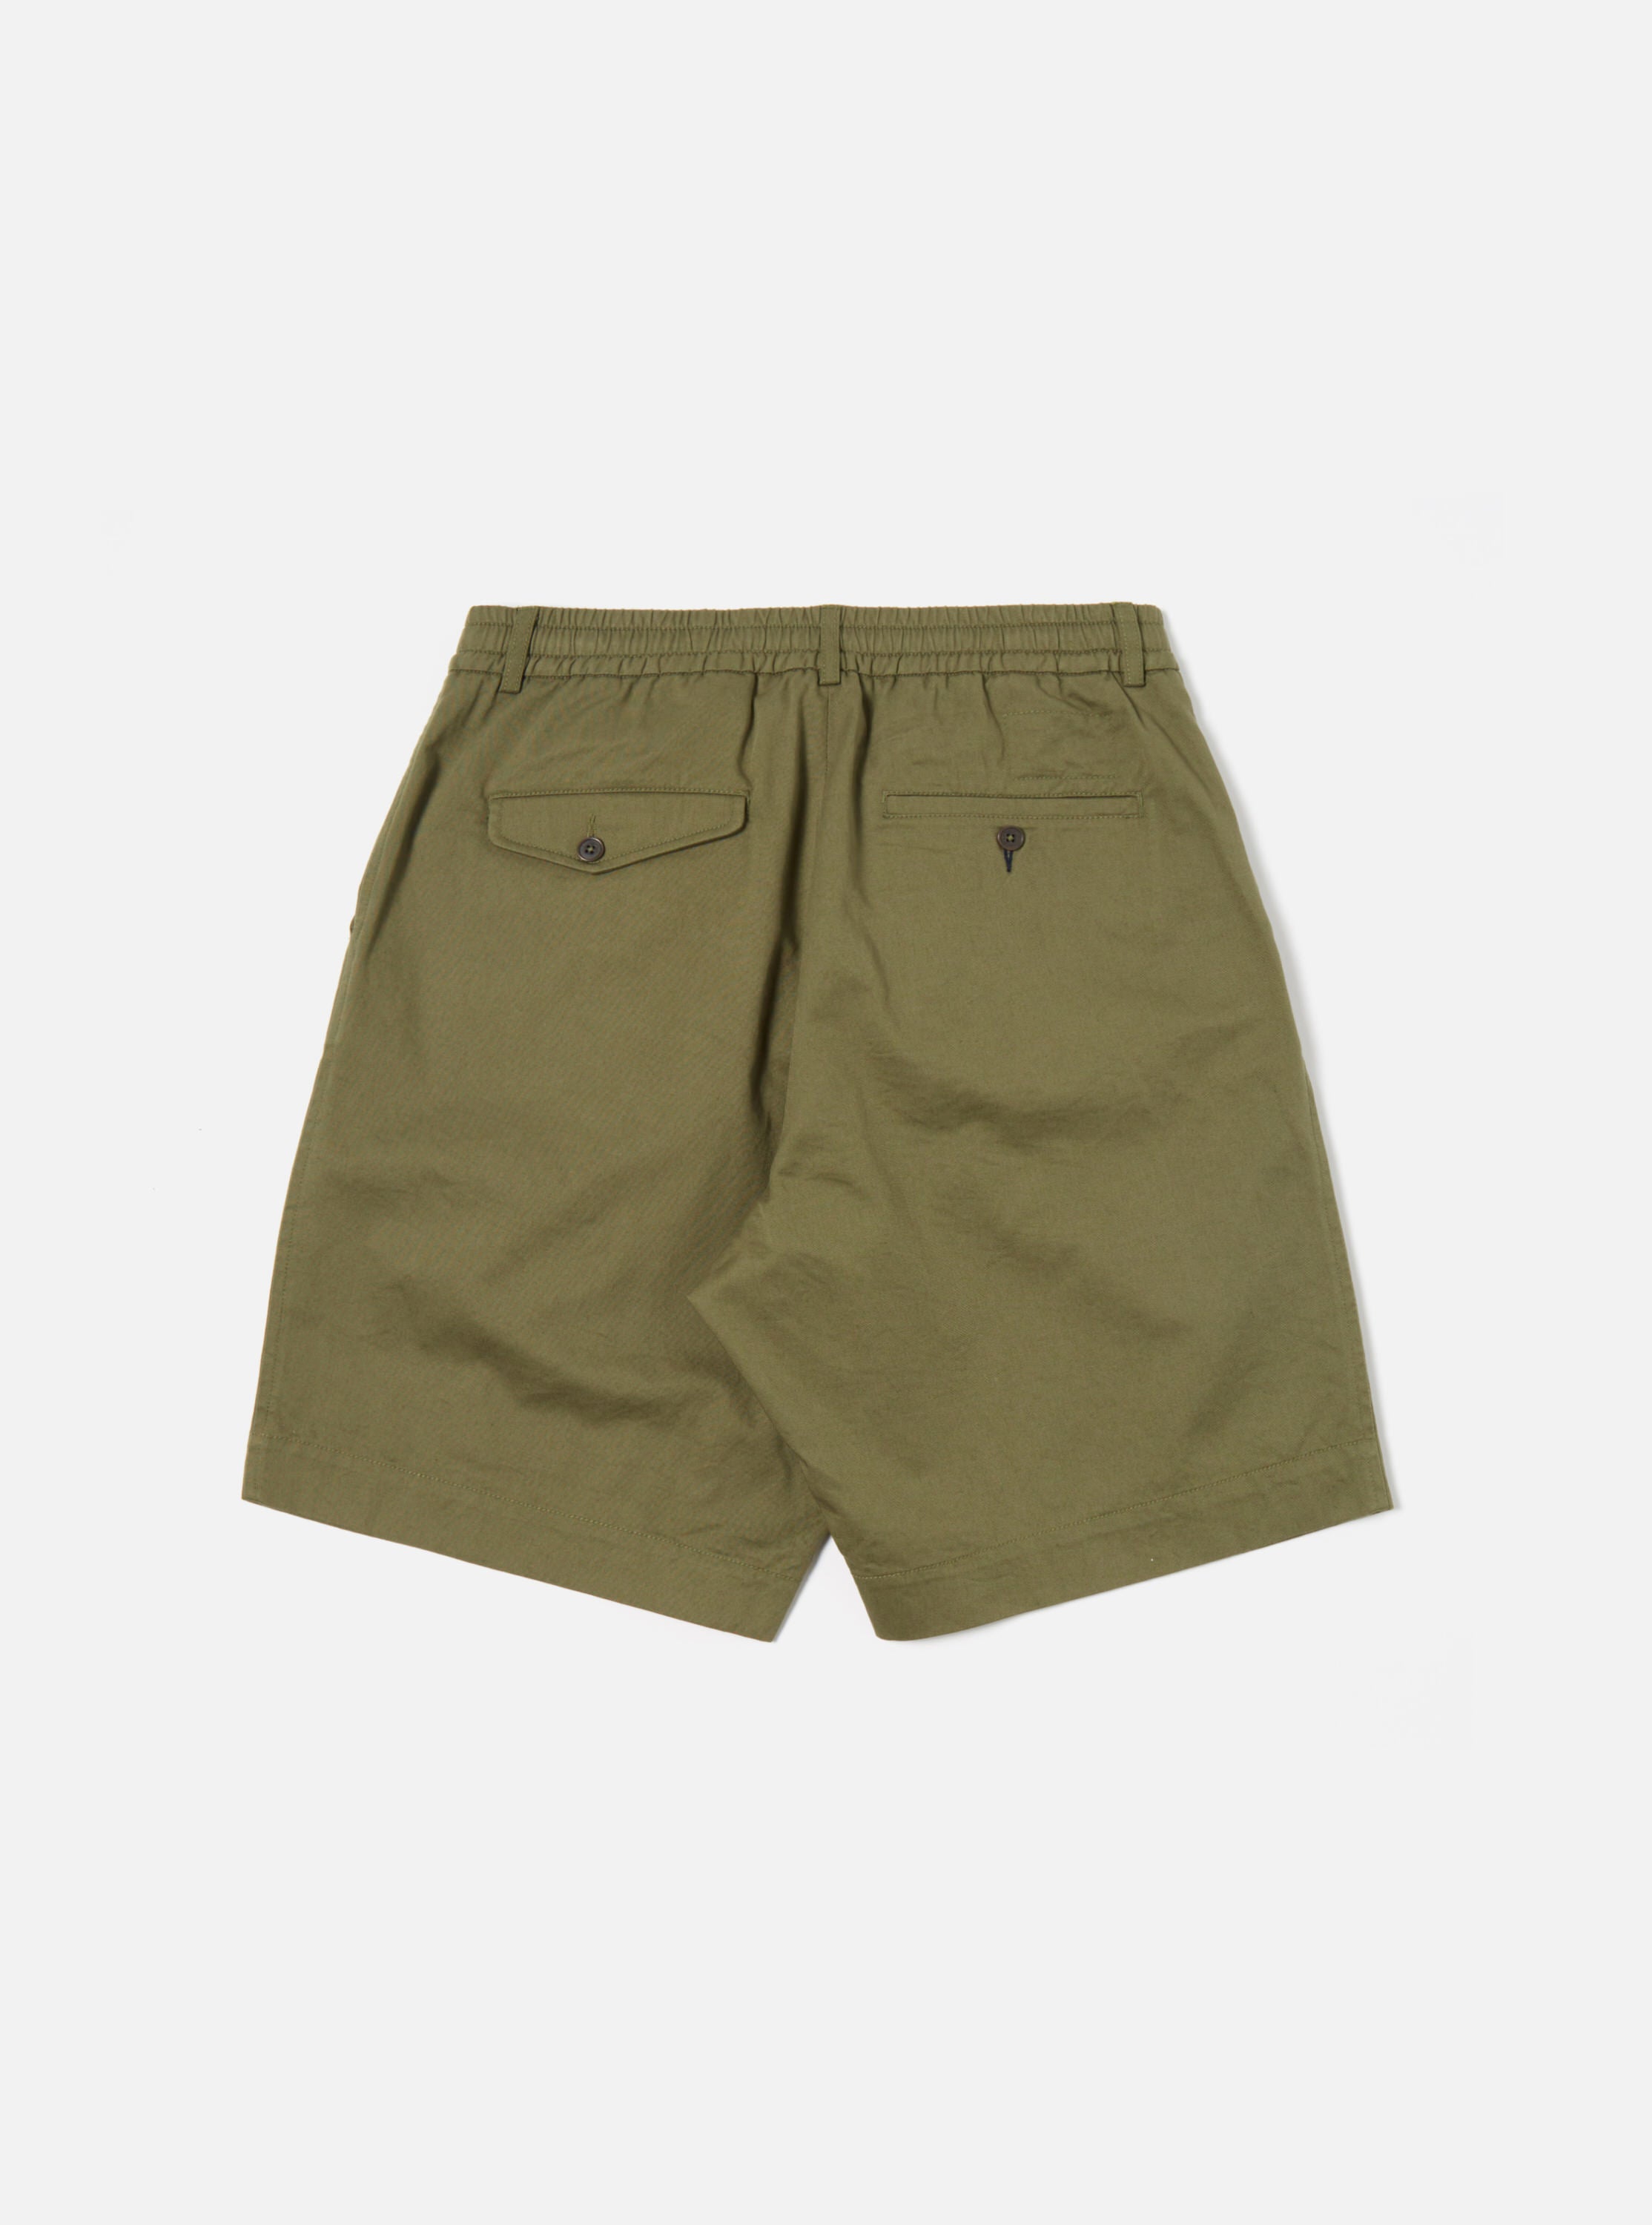 Universal Works Pleated Track Short in Light Olive Twill